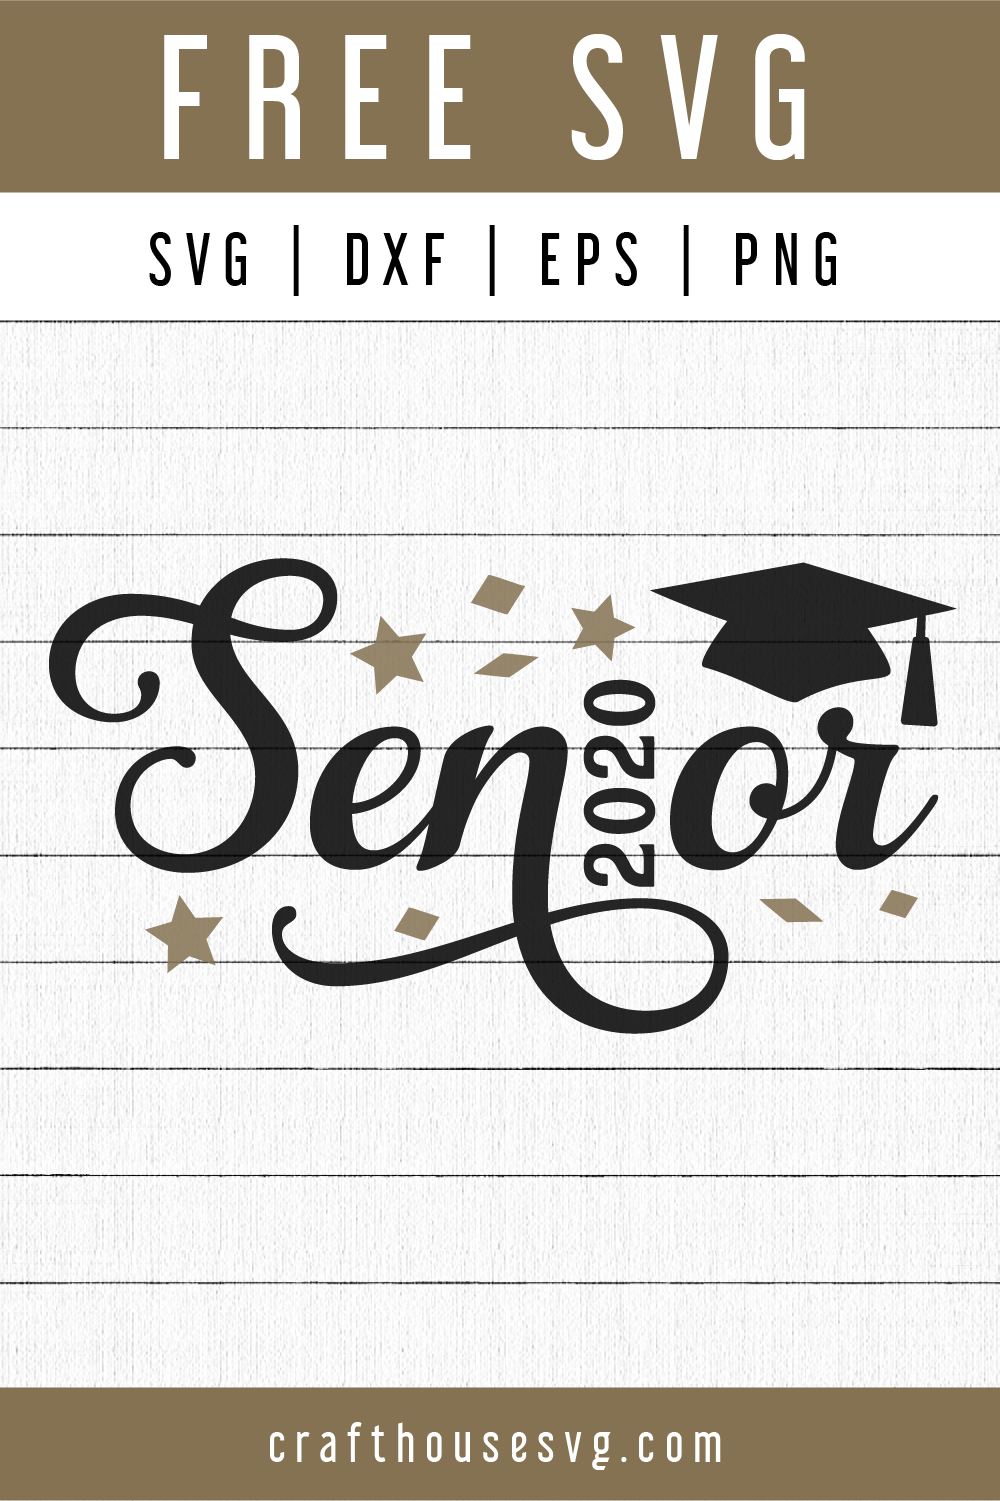 FREE Senior 2020 SVG | FB109 Craft House SVG - SVG files for Cricut and Silhouette